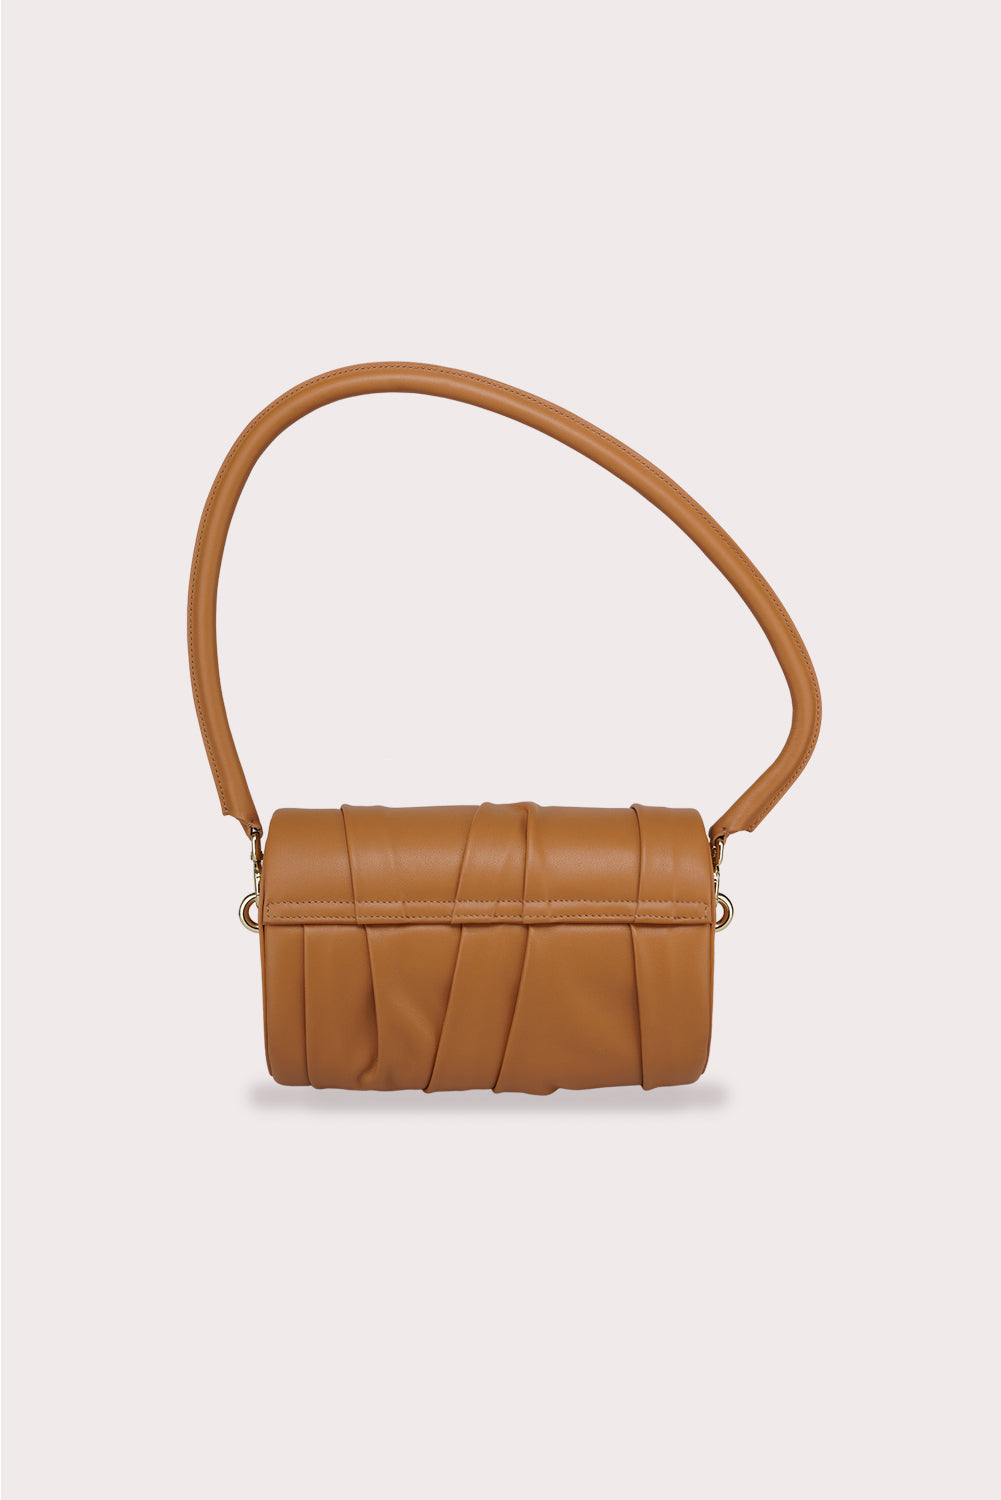 Curved Handle Dundee Bag in Caramel - Aros